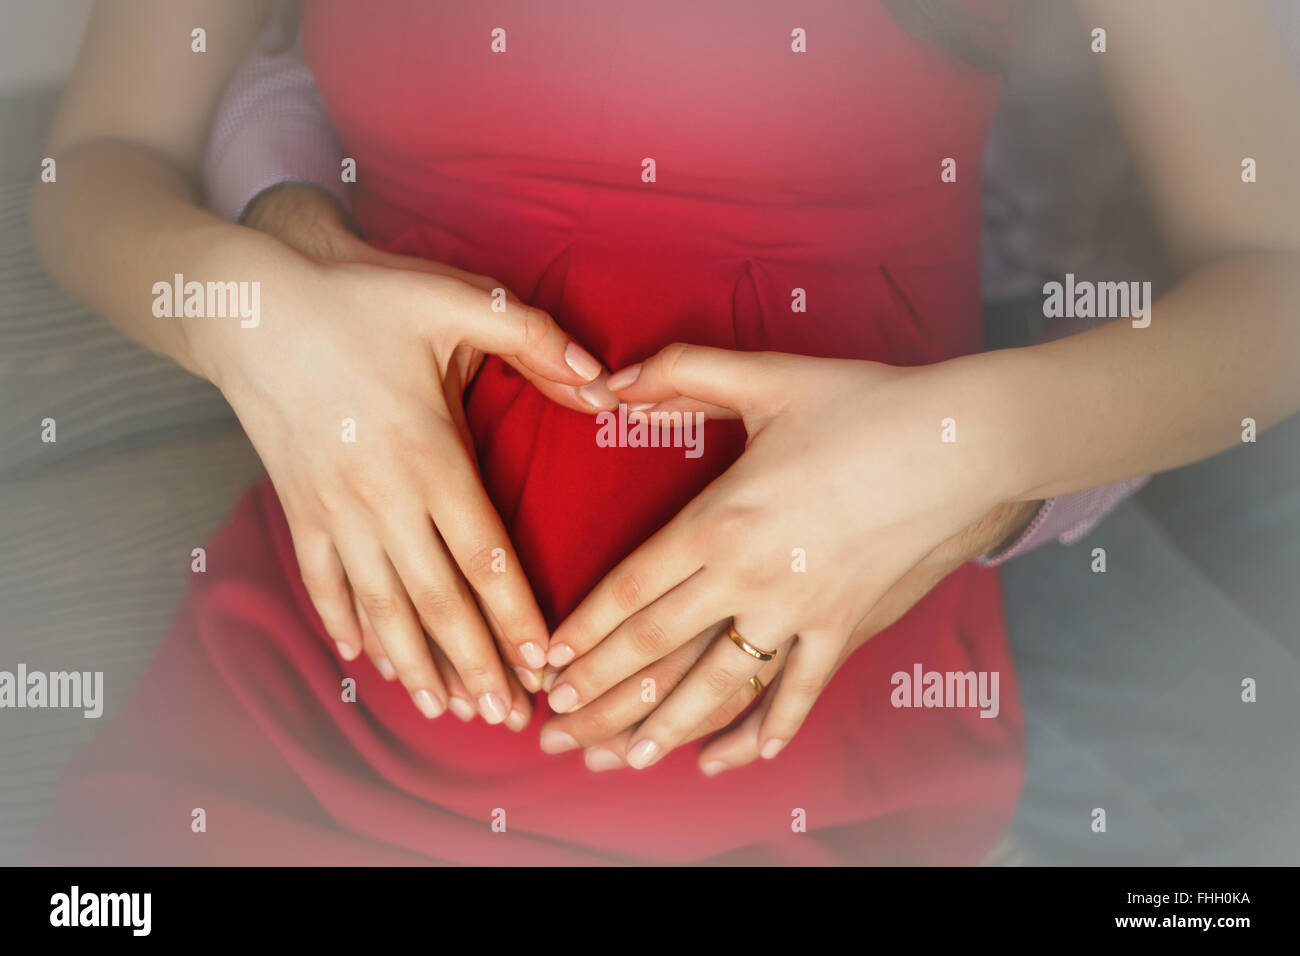 Pregnancy concept – love symbol by married couple hands Stock Photo